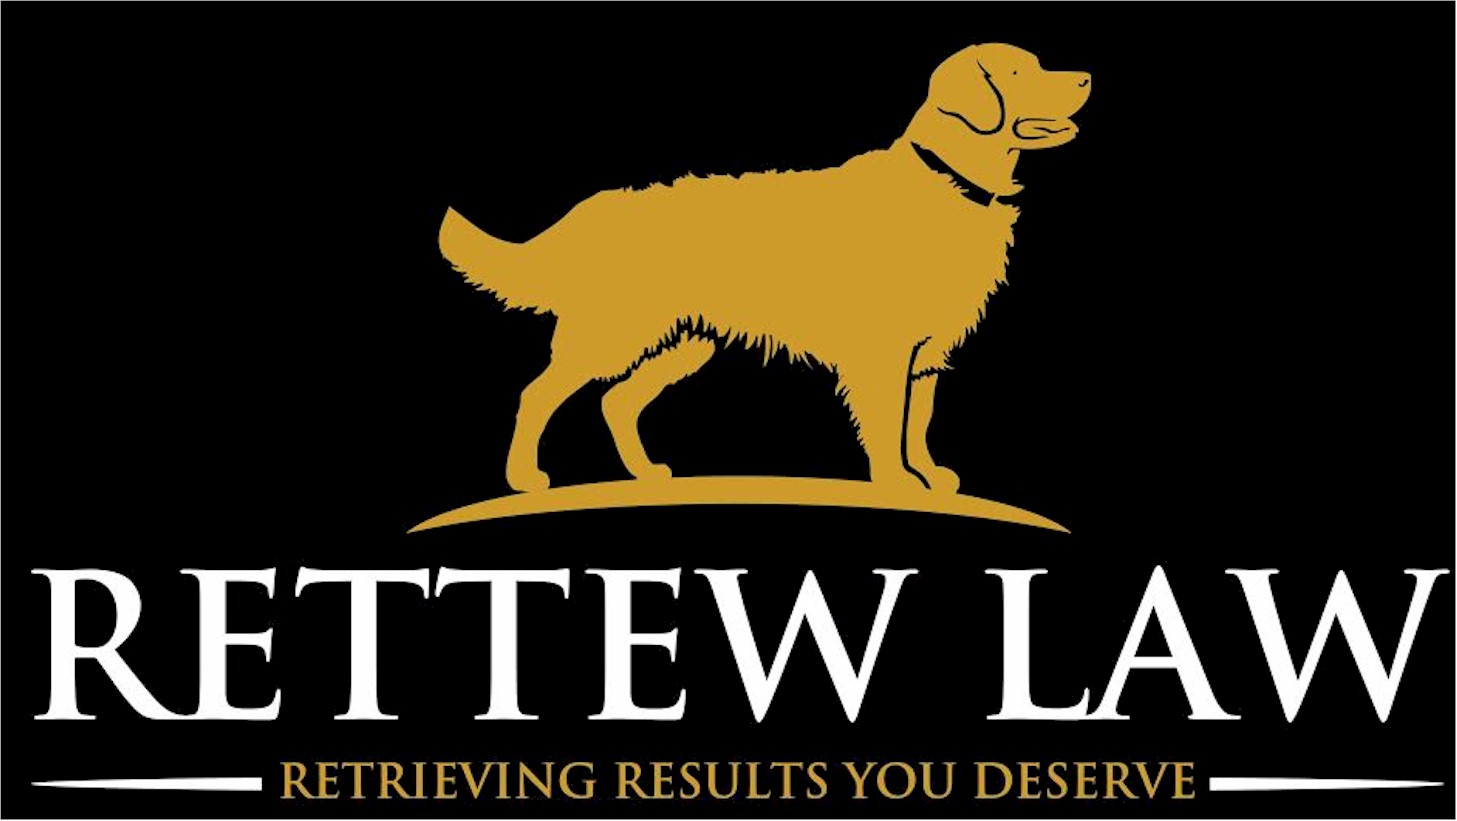 Your Storm Lawyer - Rettew Law